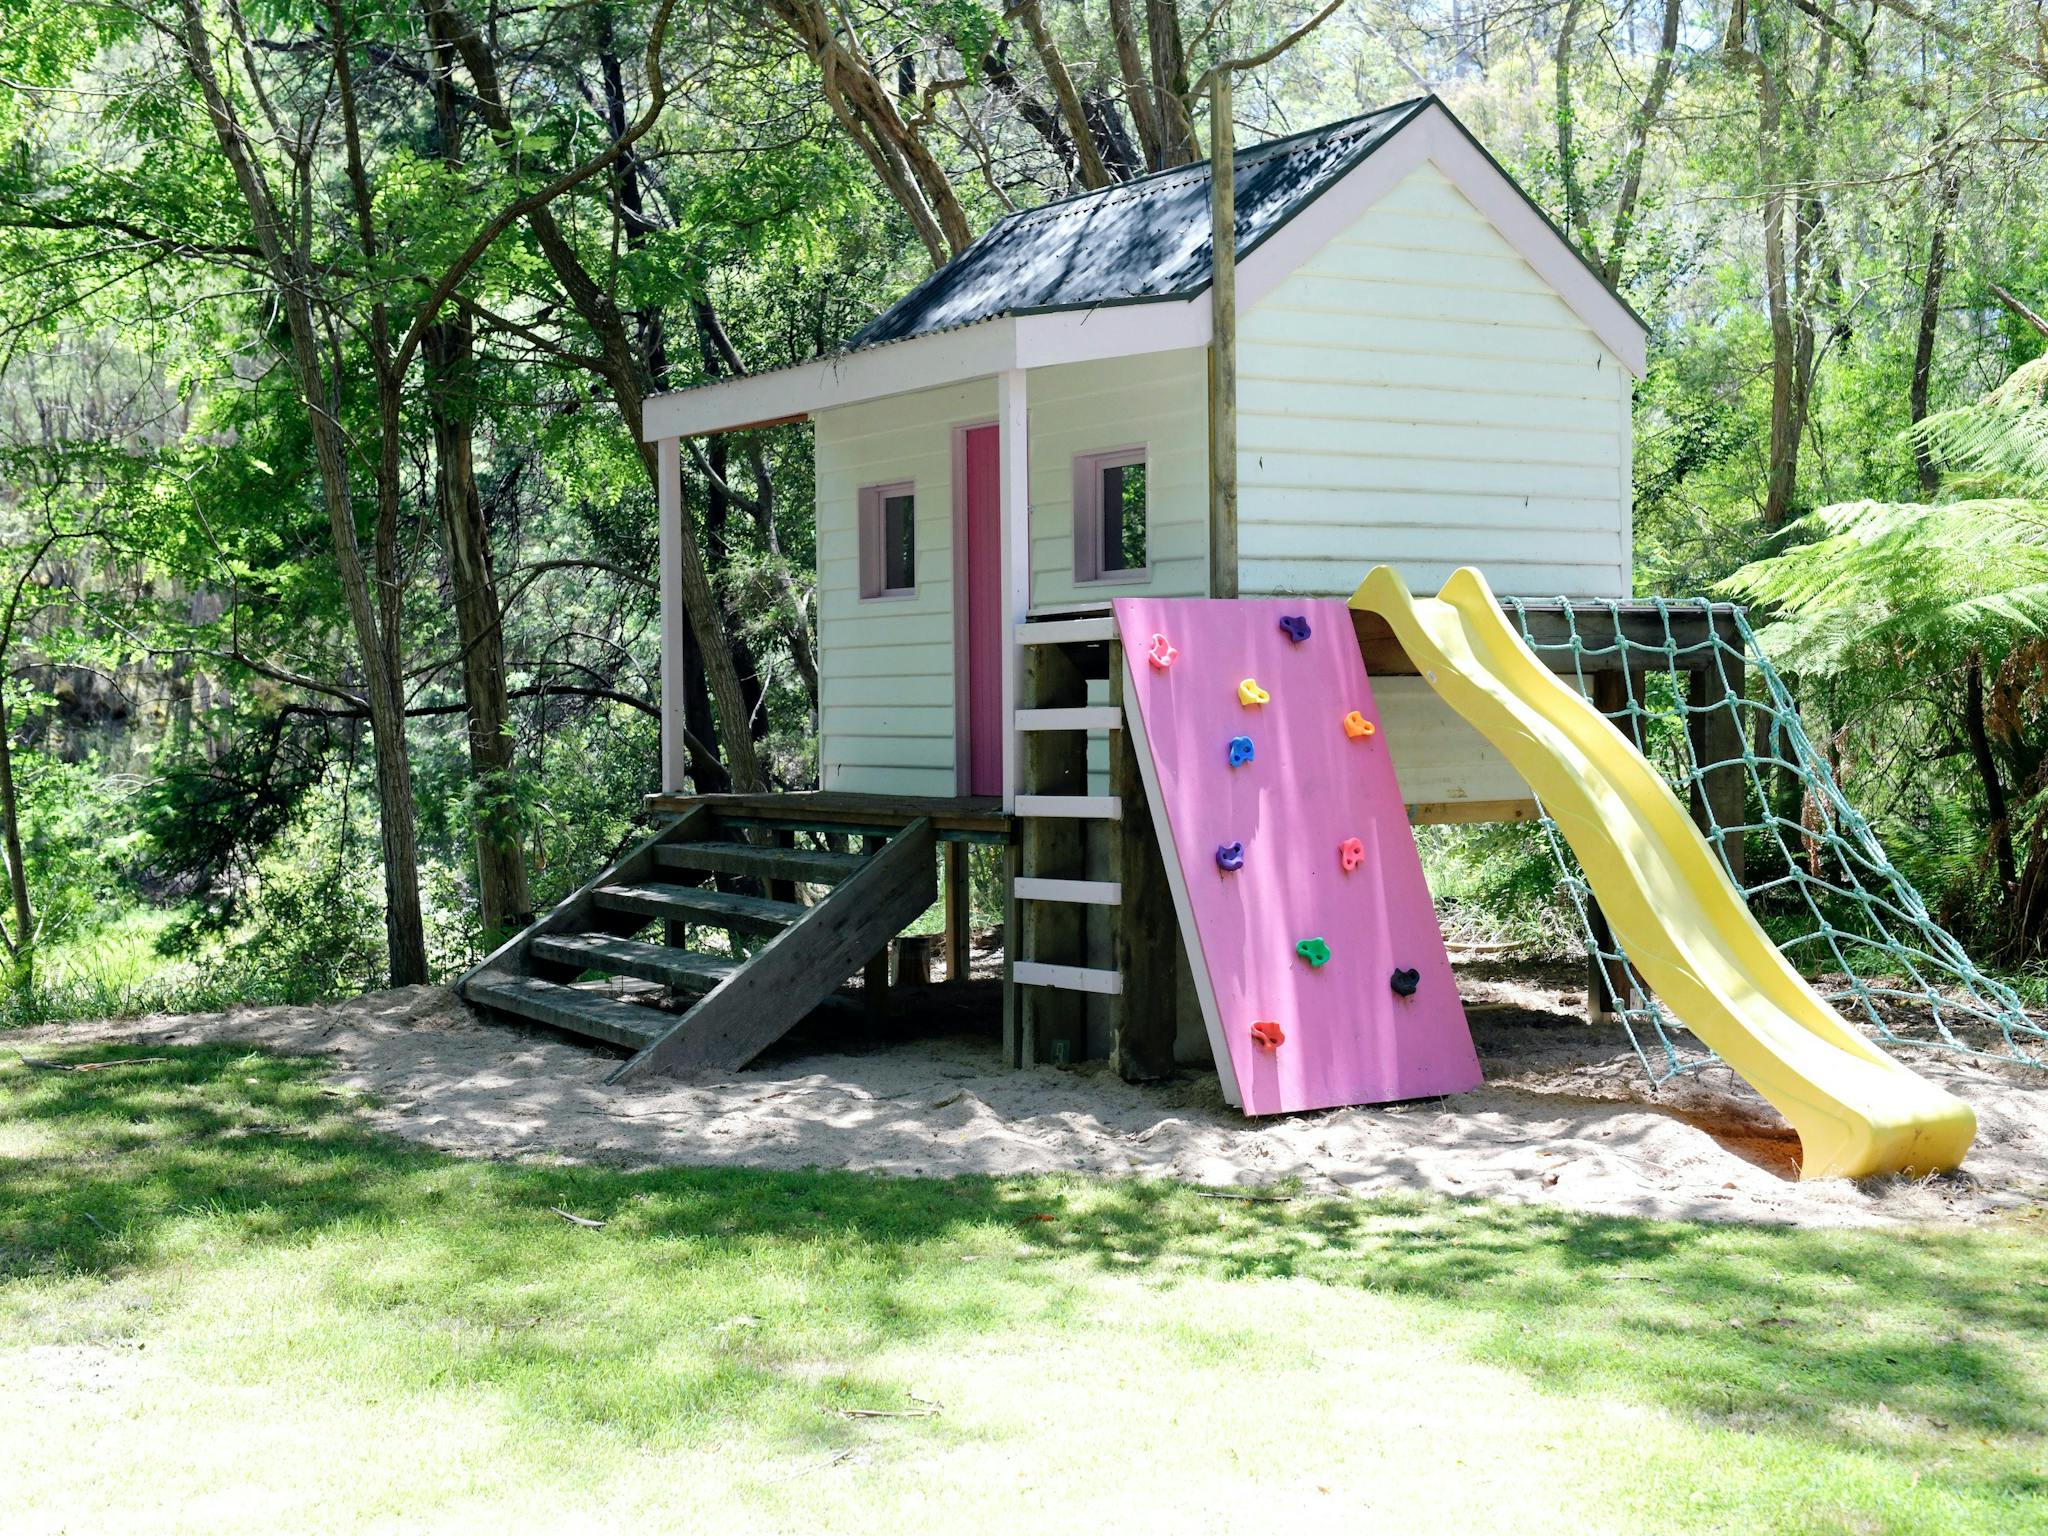 Kids cubby house complete with slides and climbing wall